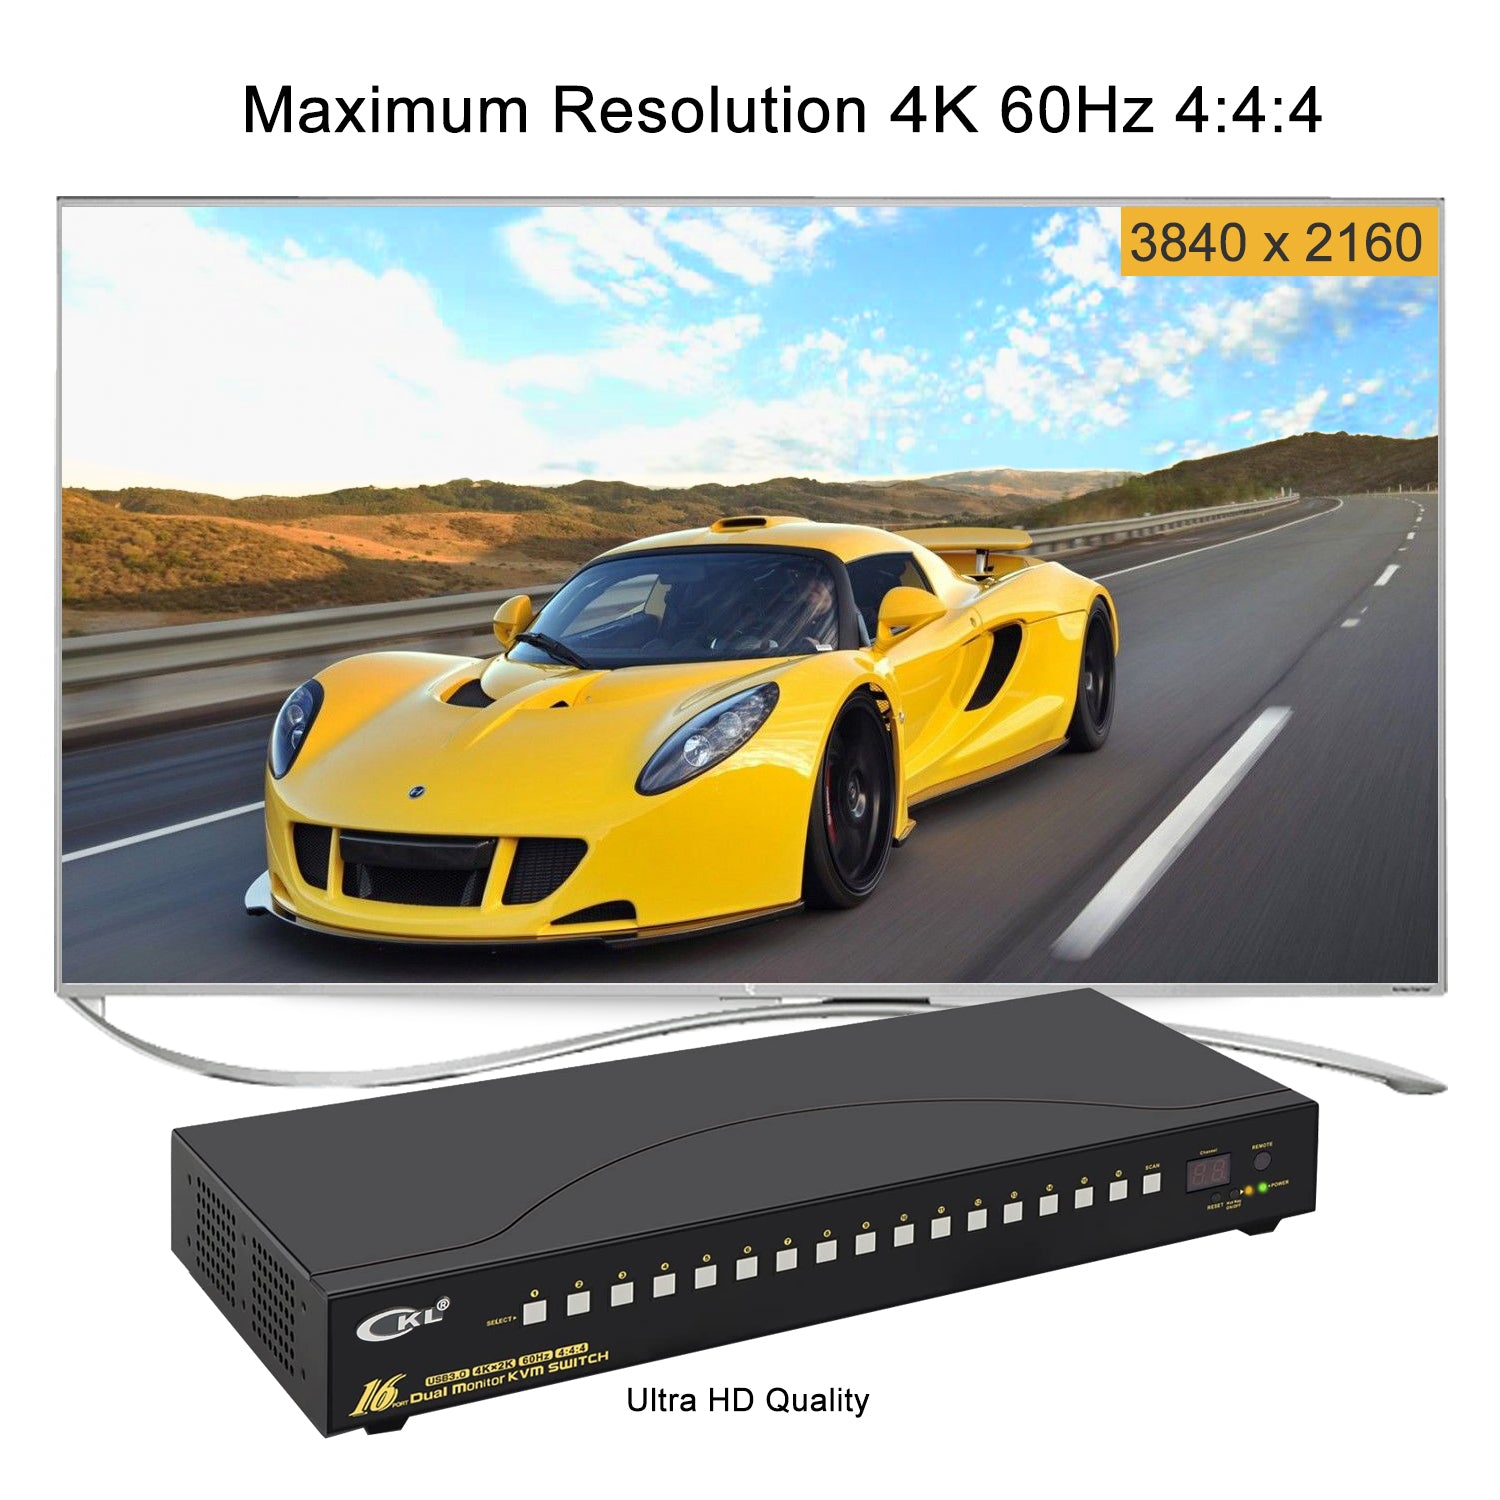 CKL 16 Port USB 3.0 Rack Mount HDMI KVM Switch Dual Monitor 4K@60Hz with Audio, 2 Integrated USB 3.0 Hub and Cables, Keyboard Mouse Hotkey Switcher Box Supports IR Remote RS232 Control （CKL-9216H-3)